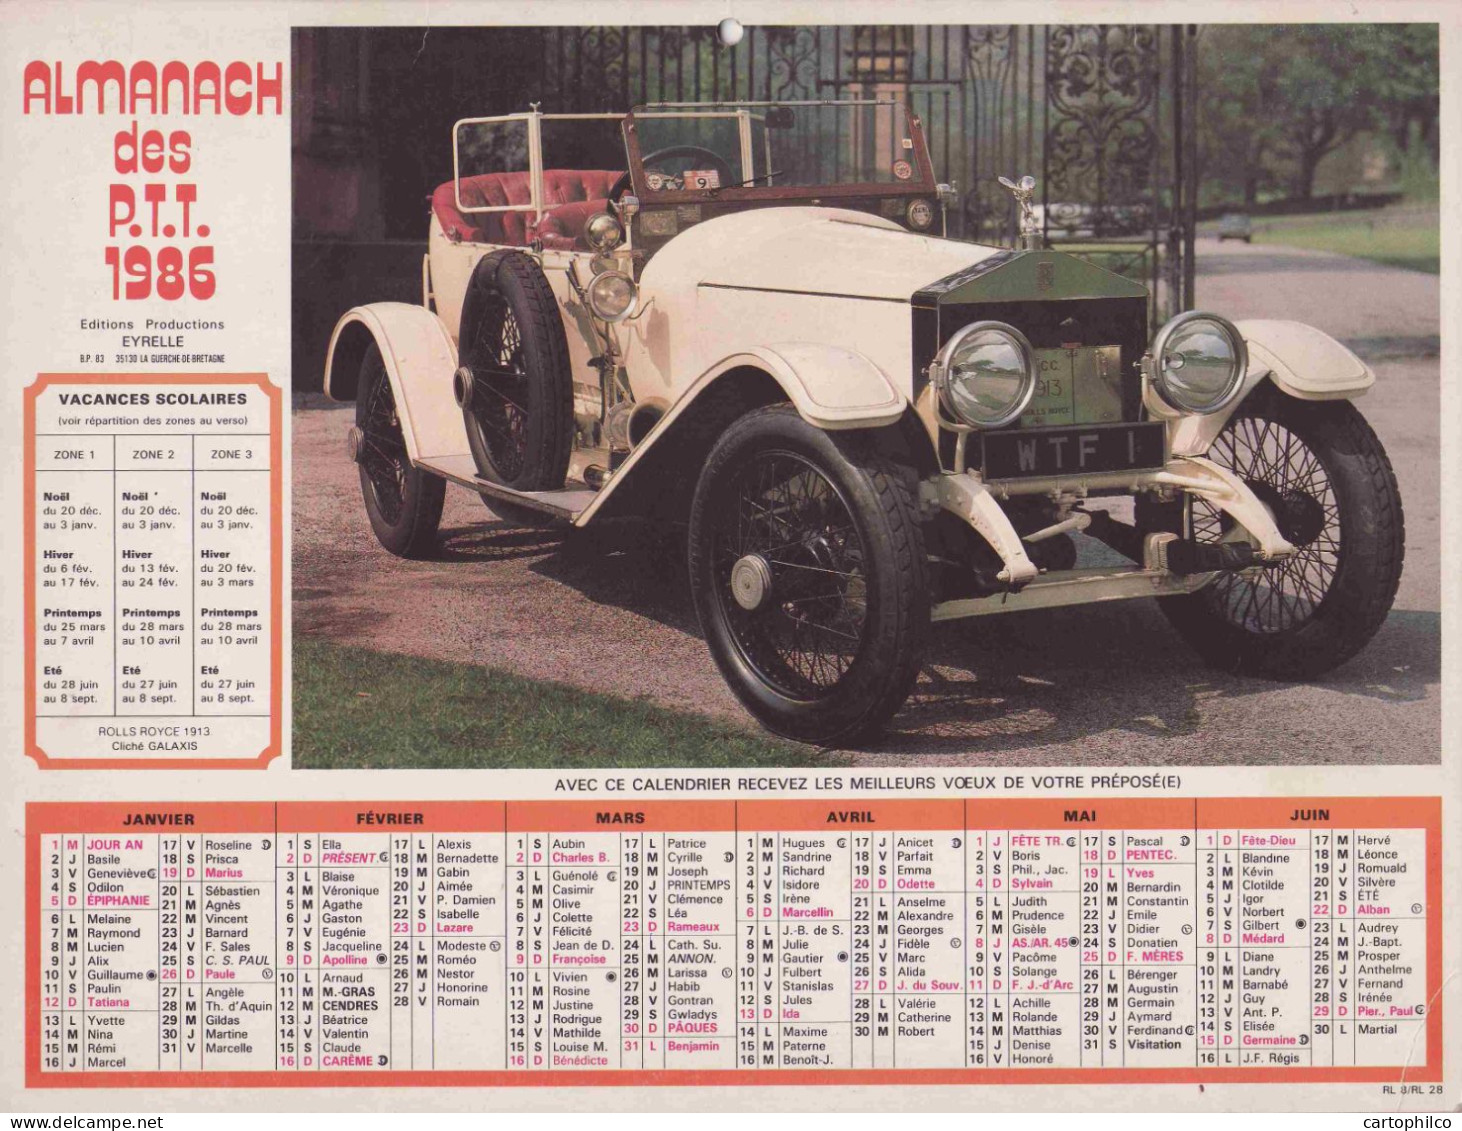 Calendrier France 1986 Corre 1901 Rolls Royce 1913 Automobile - Groot Formaat: 1981-90